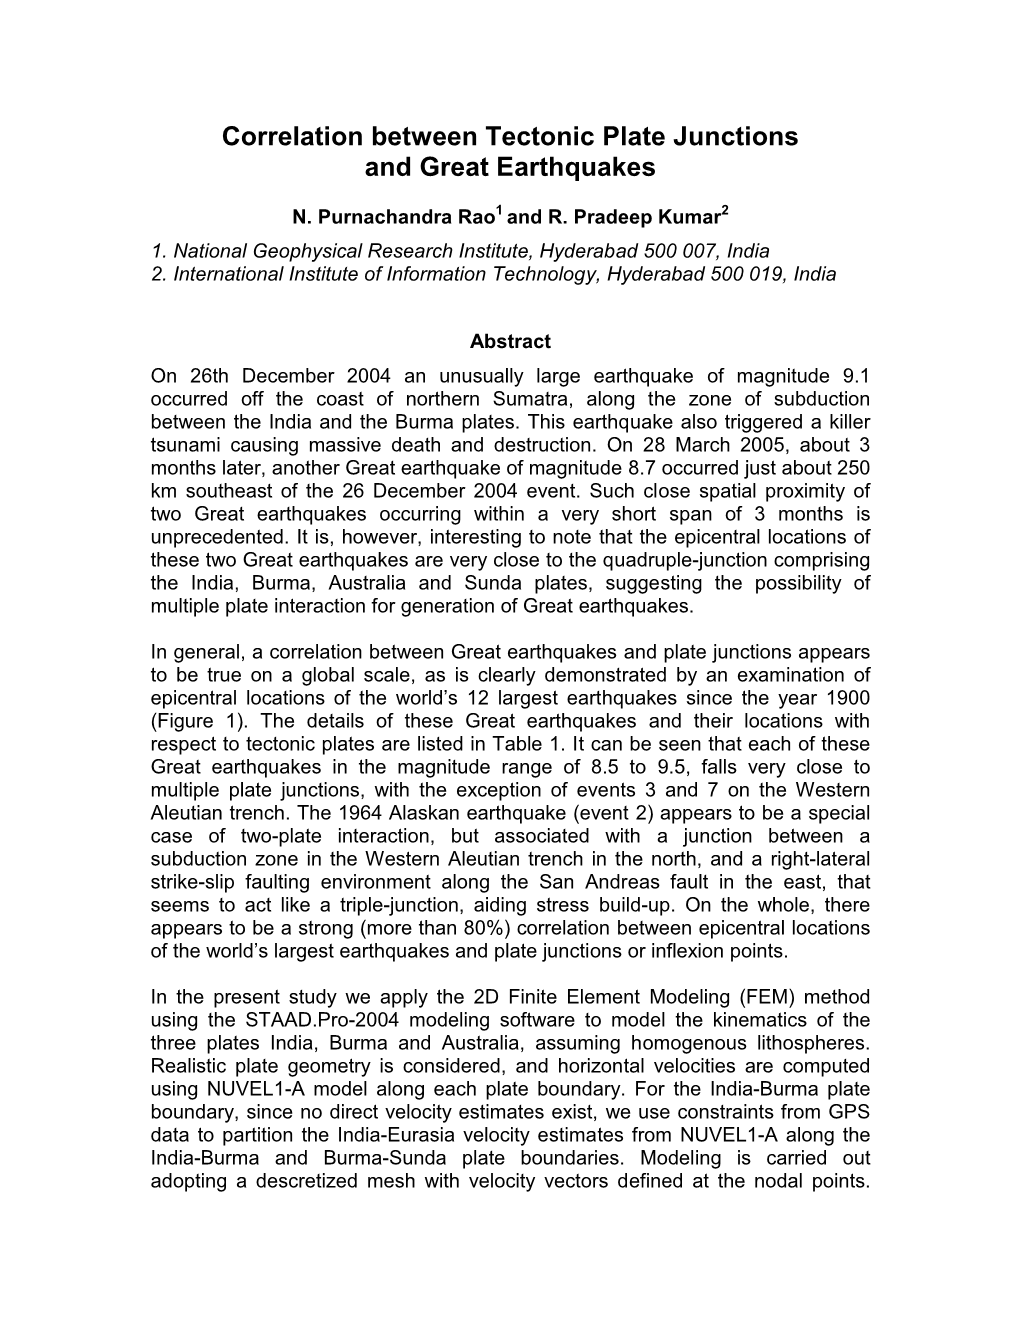 Correlation Between Tectonic Plate Junctions and Great Earthquakes